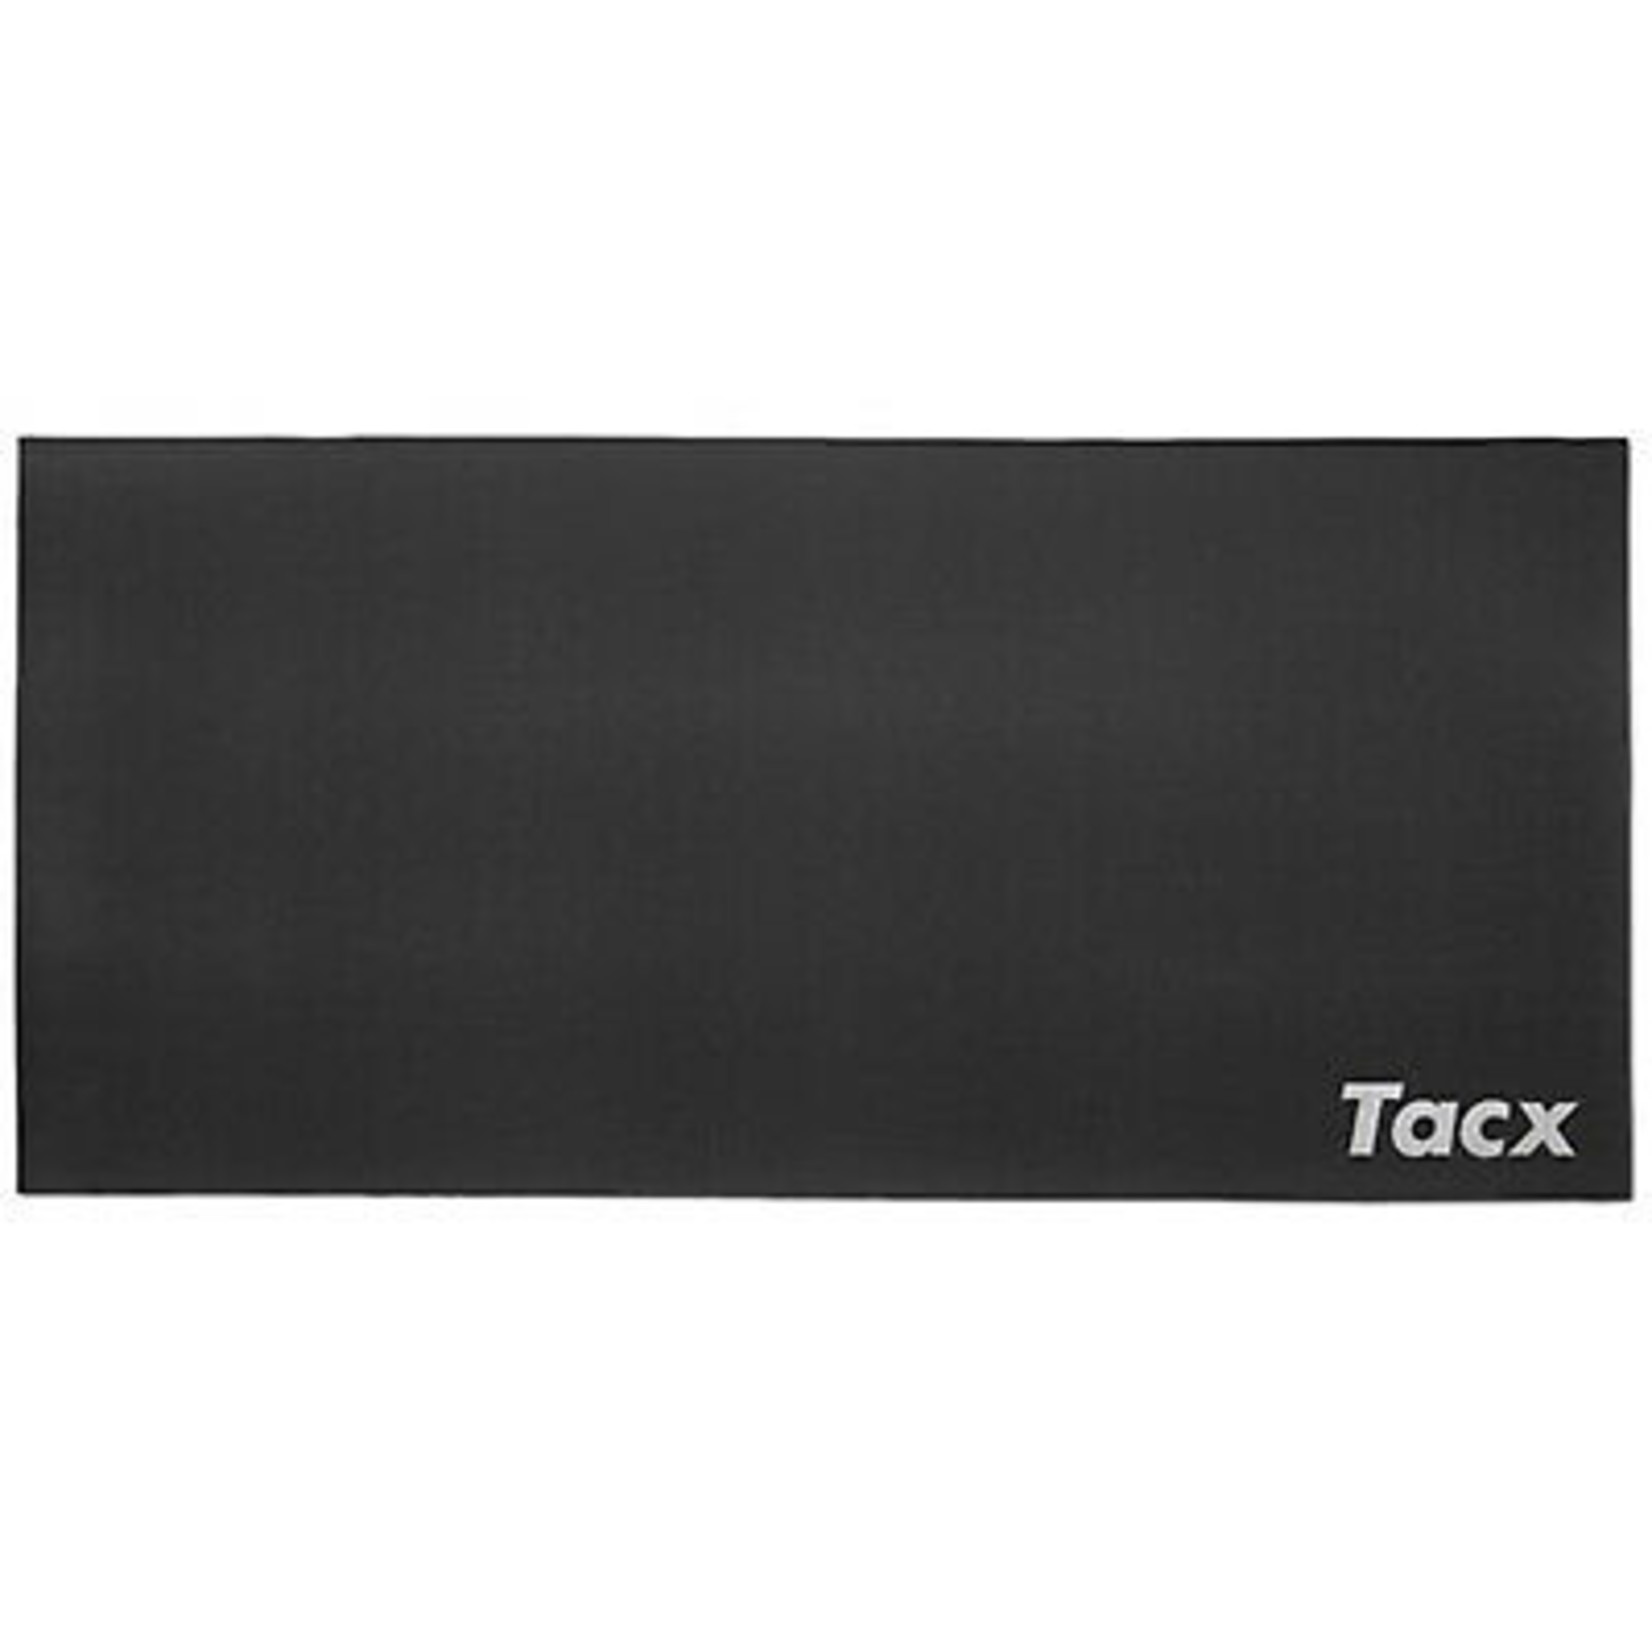 Tacx ® Rollable Trainer Mat